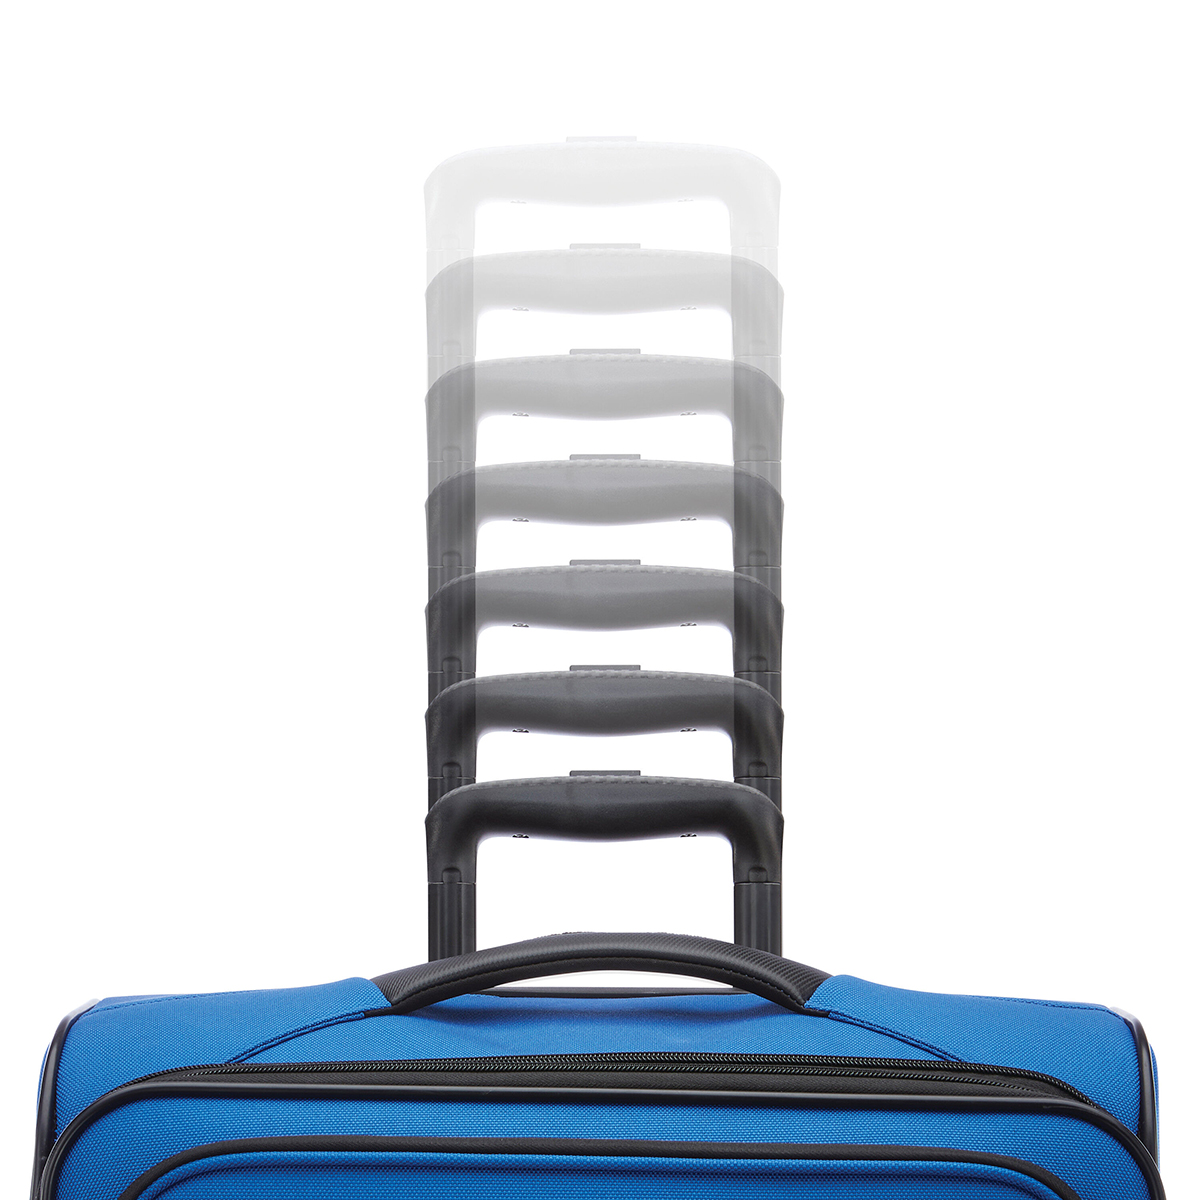 American Tourister(R) 4 Kix 2.0 20in. Carry-On Spinner Luggage